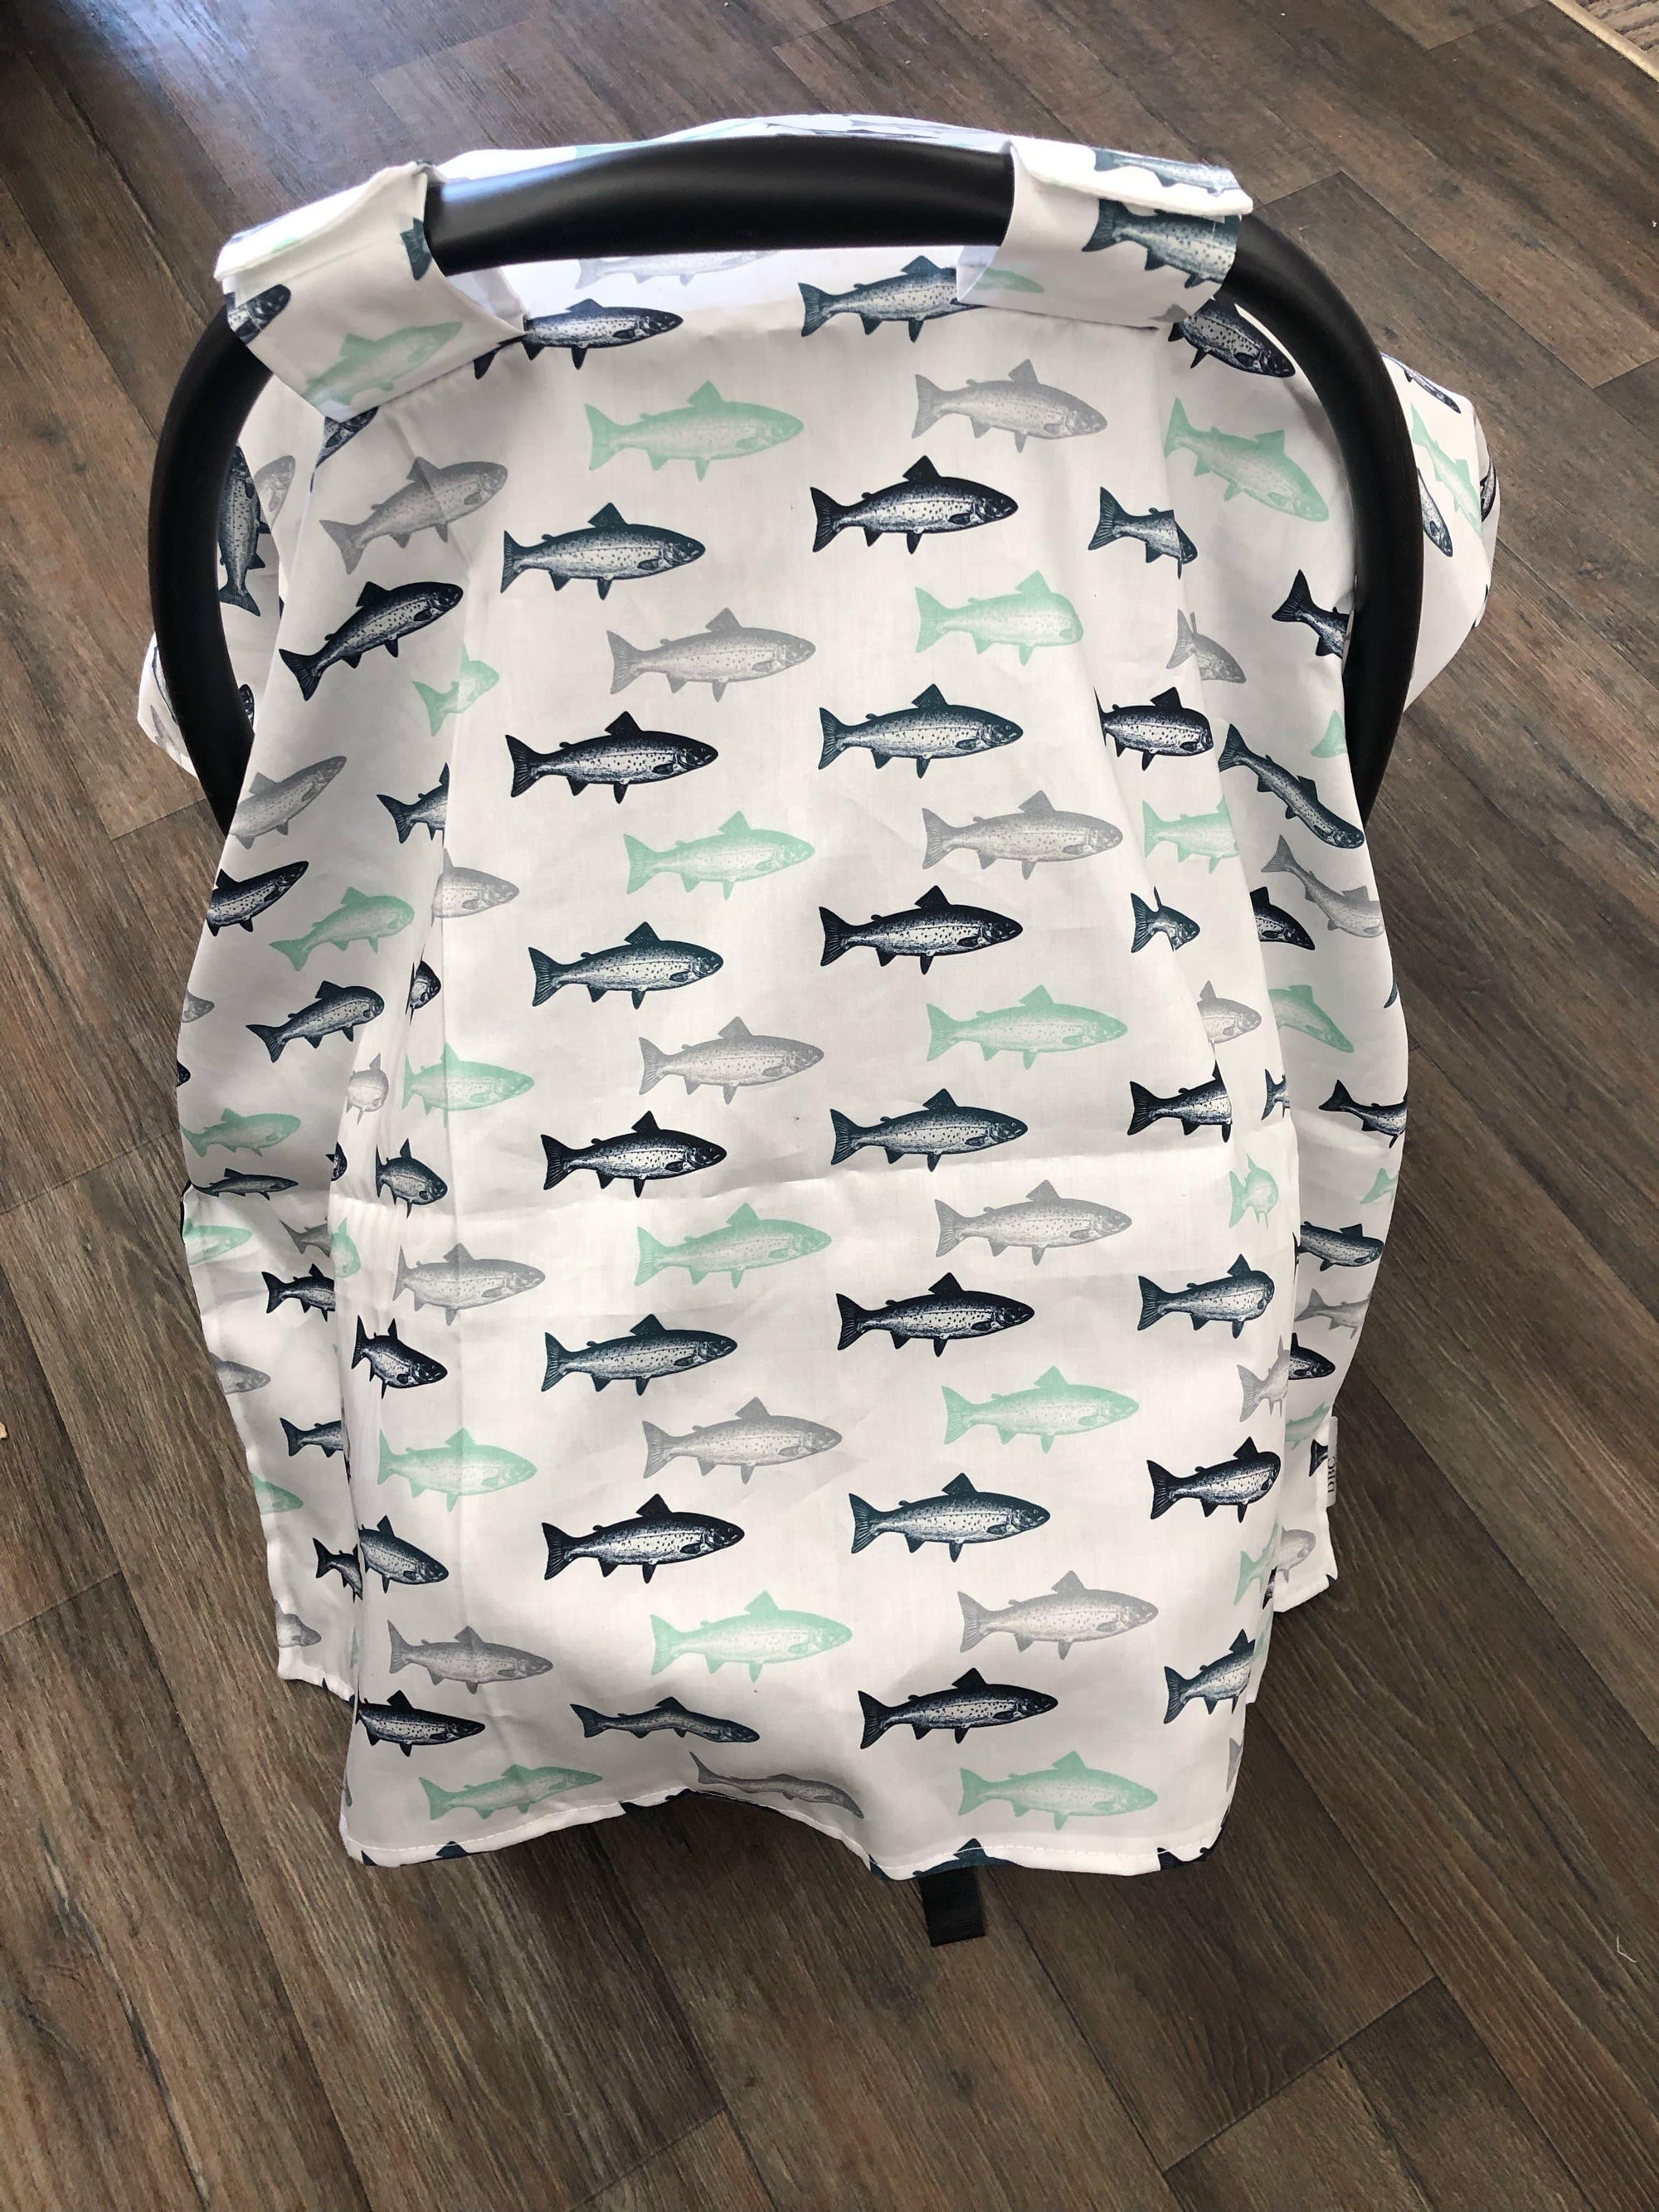 Custom Carseat tent - Trout Fish - DBC Baby Bedding Co 